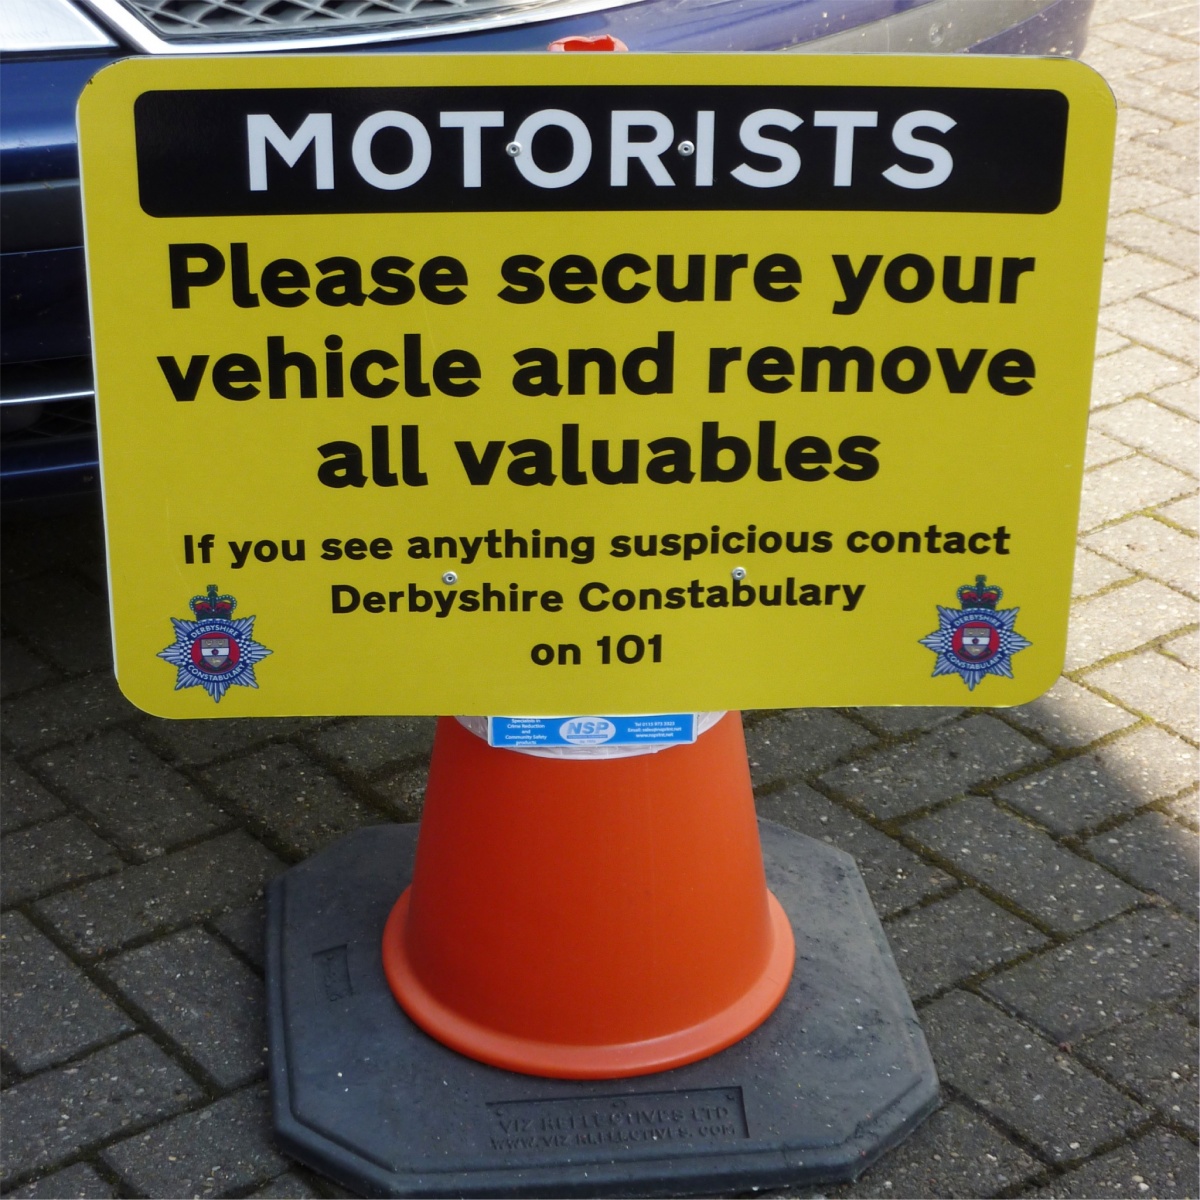 temporary cone sign advising vehicle users to take valuables with them